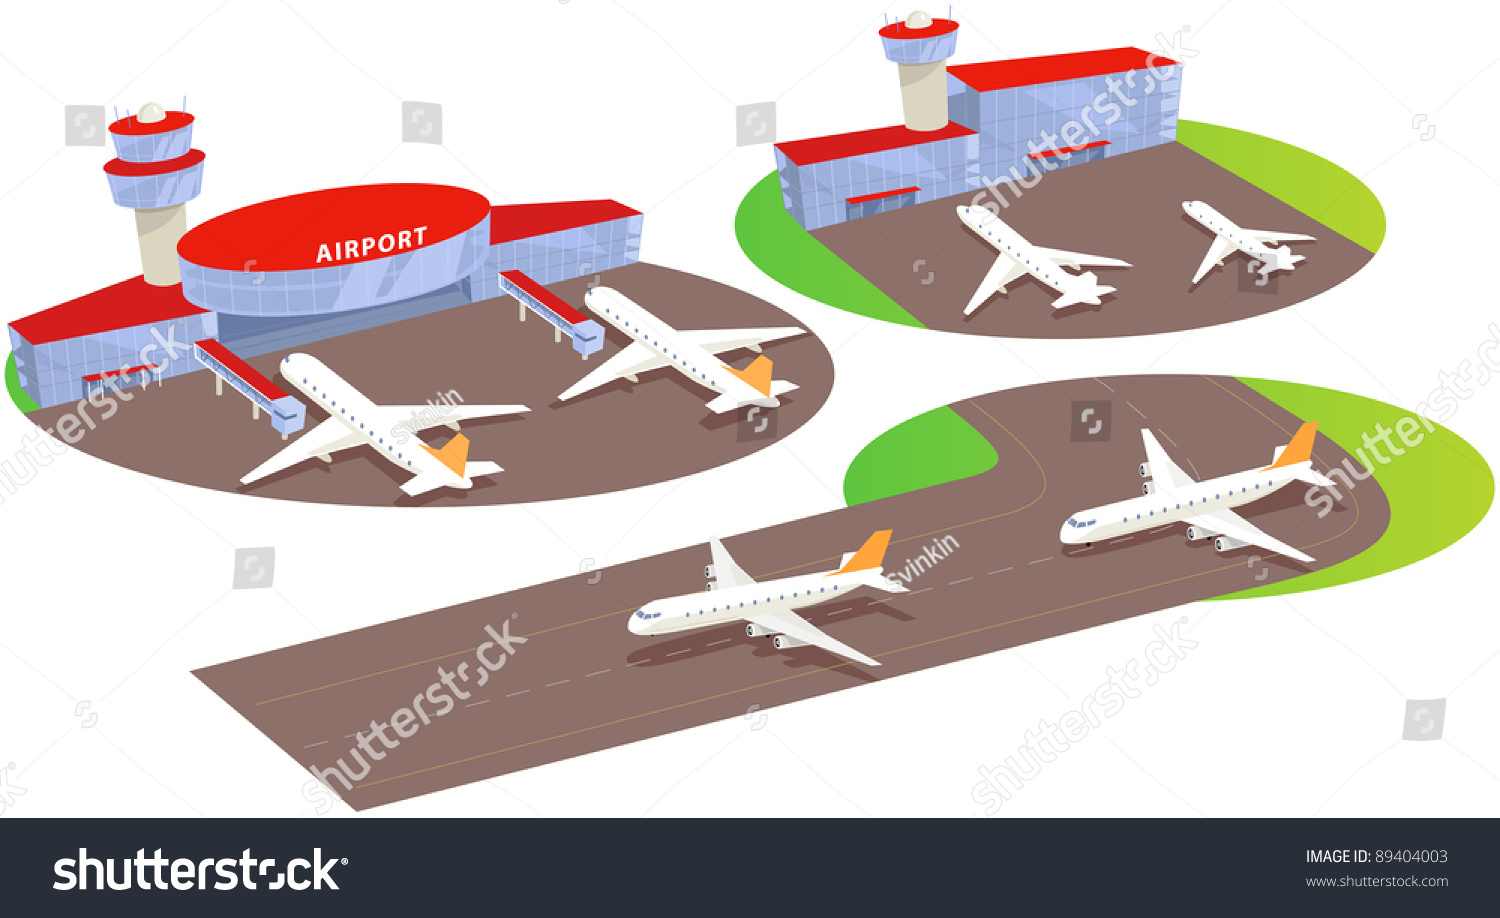 airport clipart - photo #45